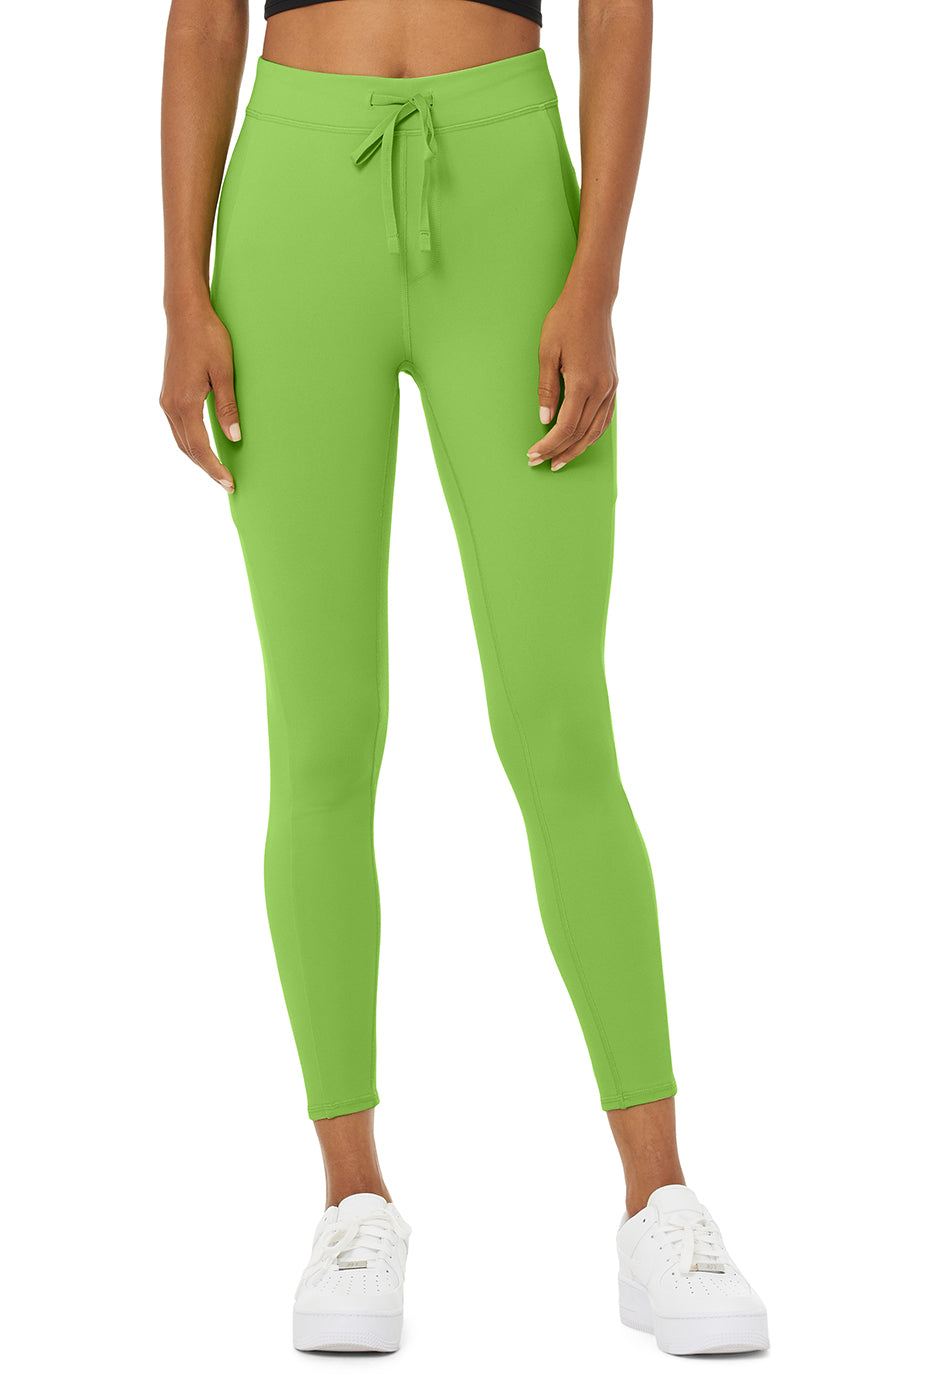 7/8 High-Waist Checkpoint Legging in Green Apple by Alo Yoga - Work Well  Daily